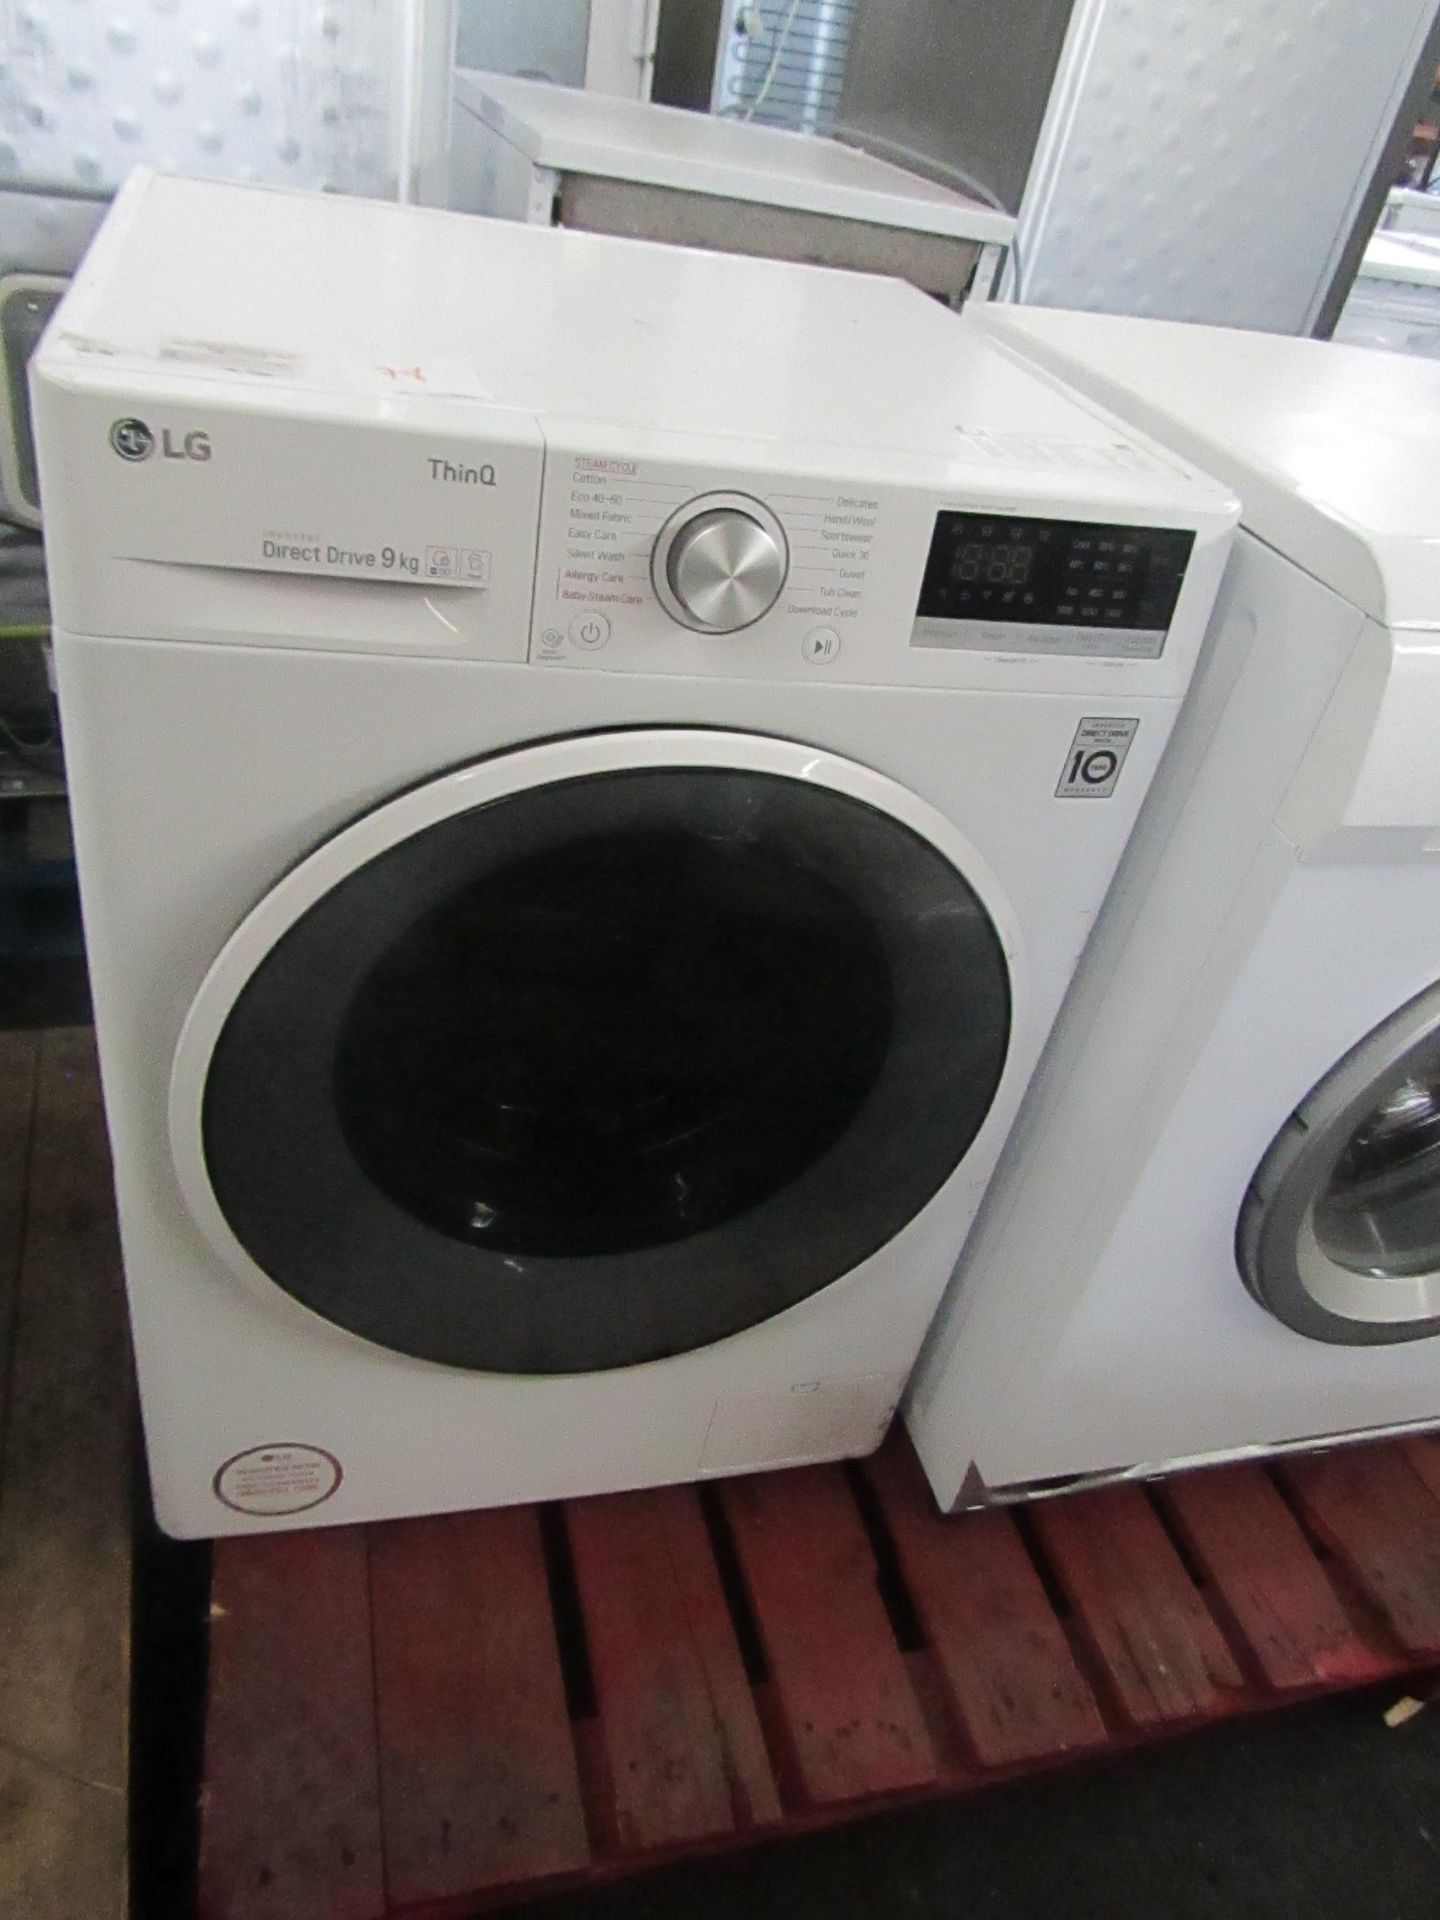 LG F4V509WSE 9Kg Wifi Enabled washing machine, Powers on and Spins but we have not connected it to